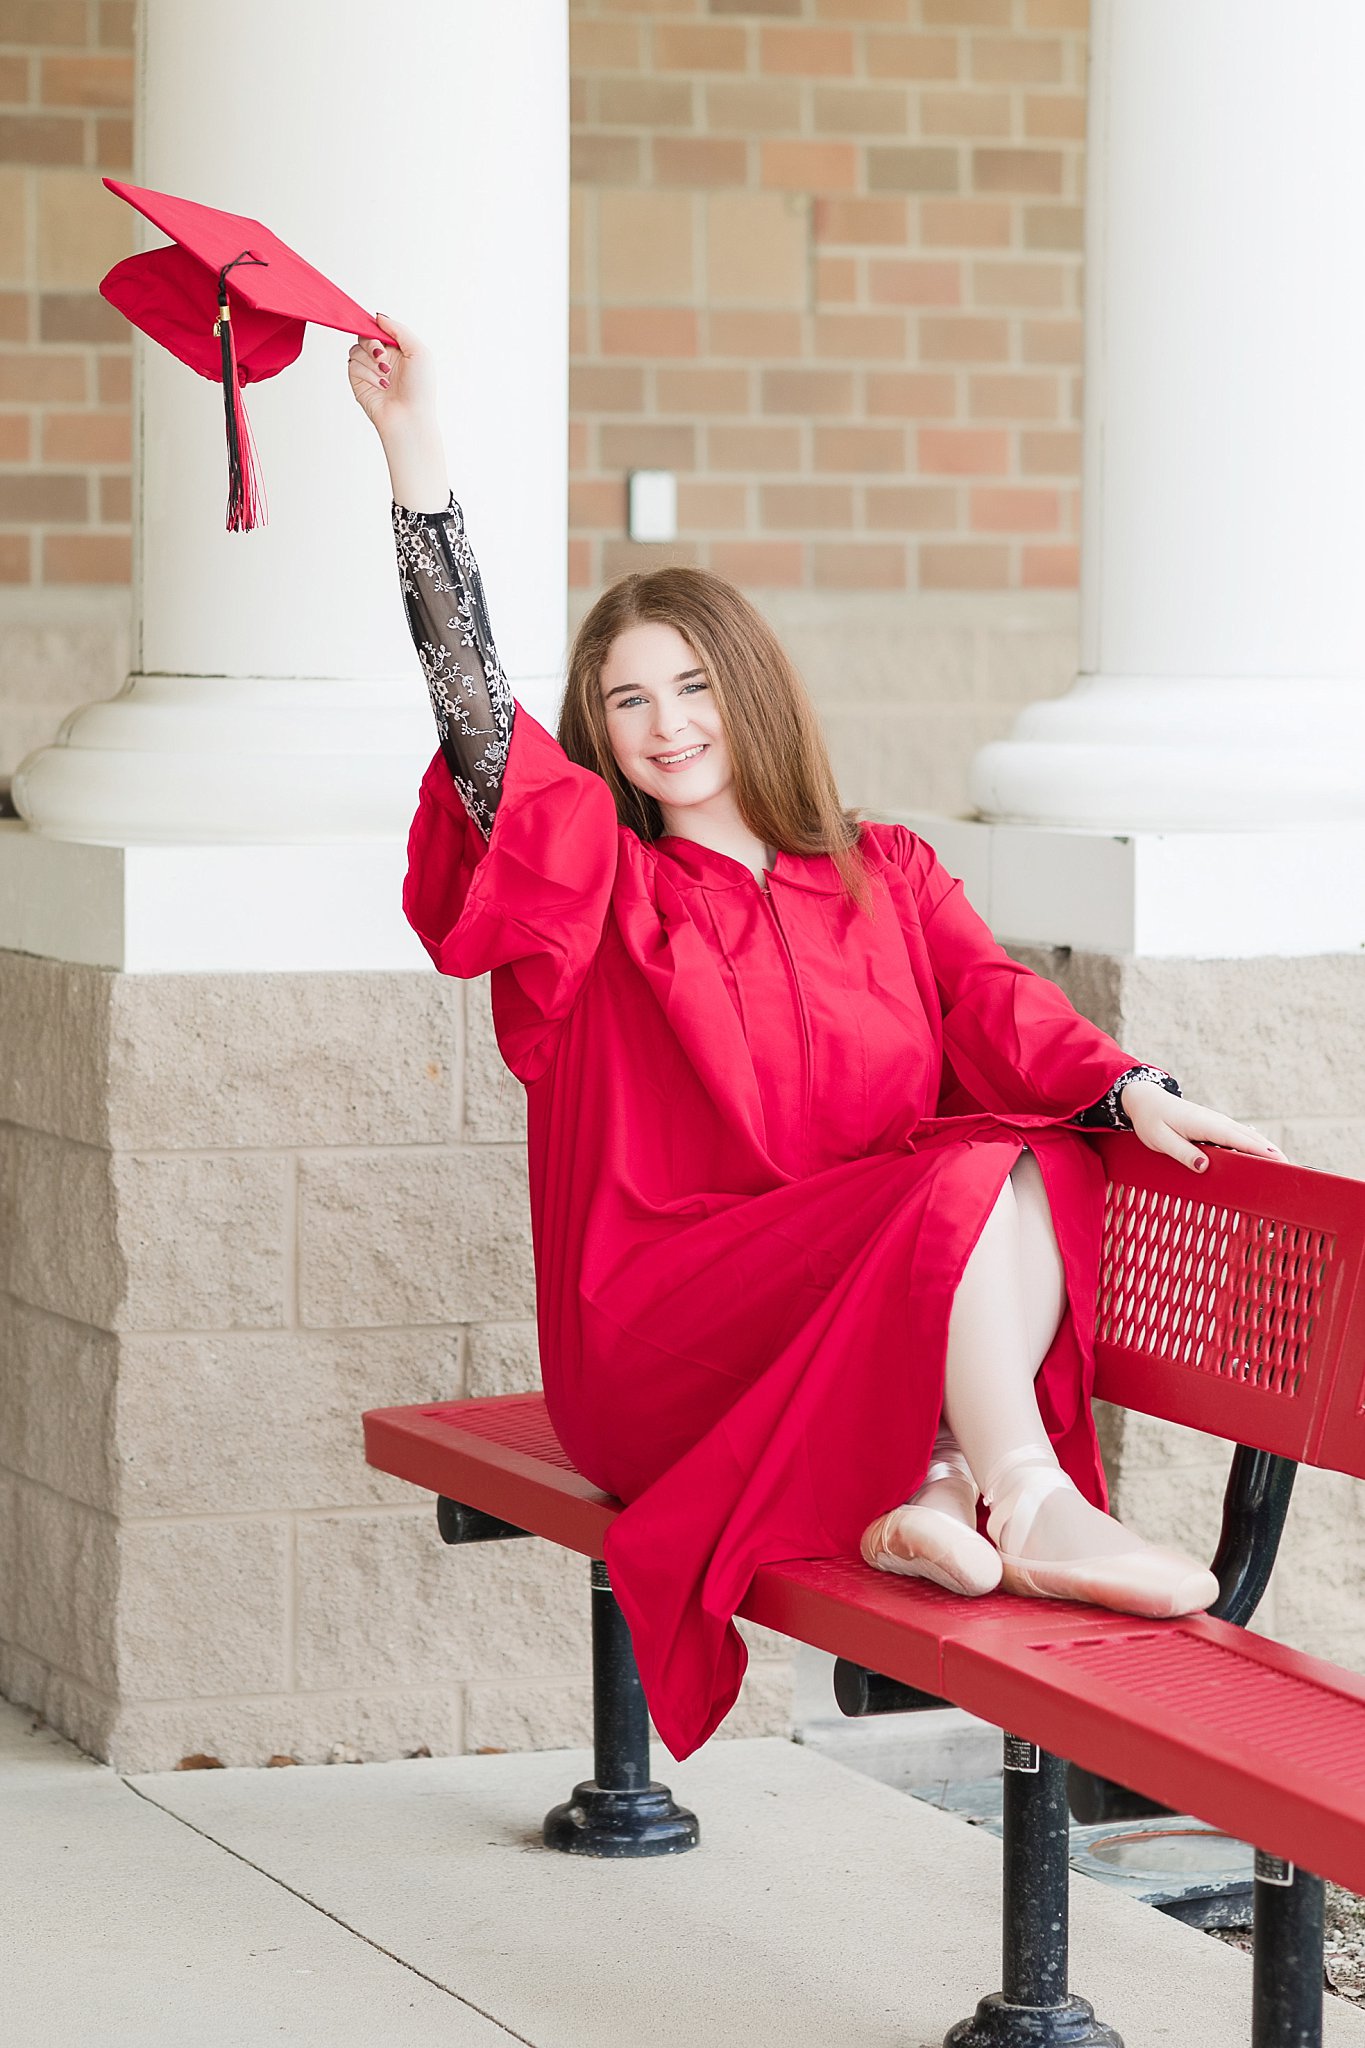 2020 Senior Cap and Gown Session